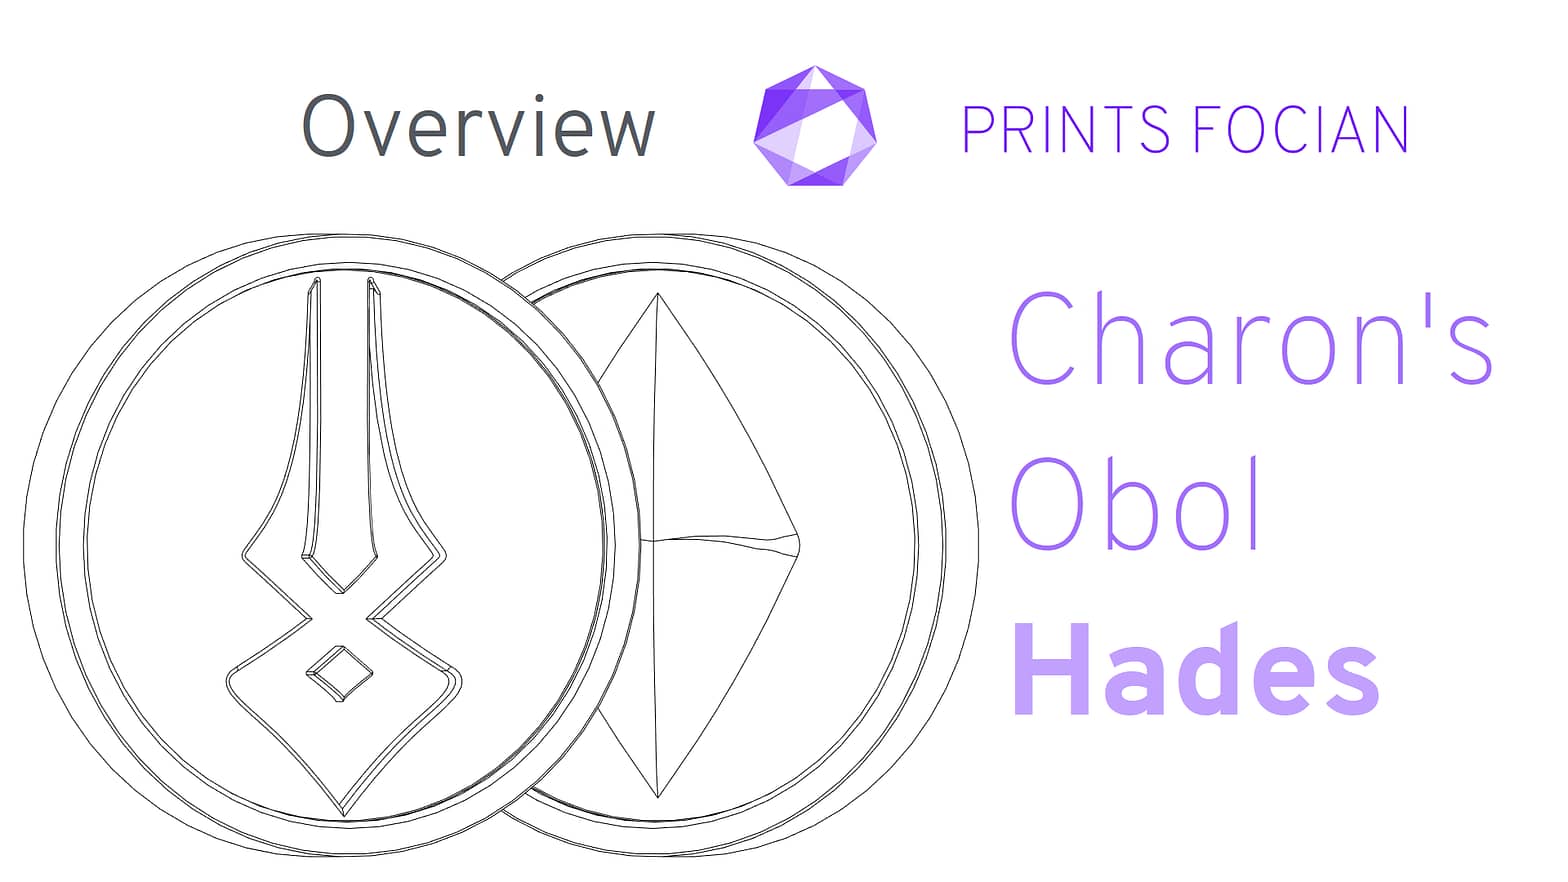 Wireframe image of Charon's Obol on a white background. Prints Focian Icon top and central. Text: Purple Prints Focian, Charon's Obol, and Hades. Dark grey text Overview